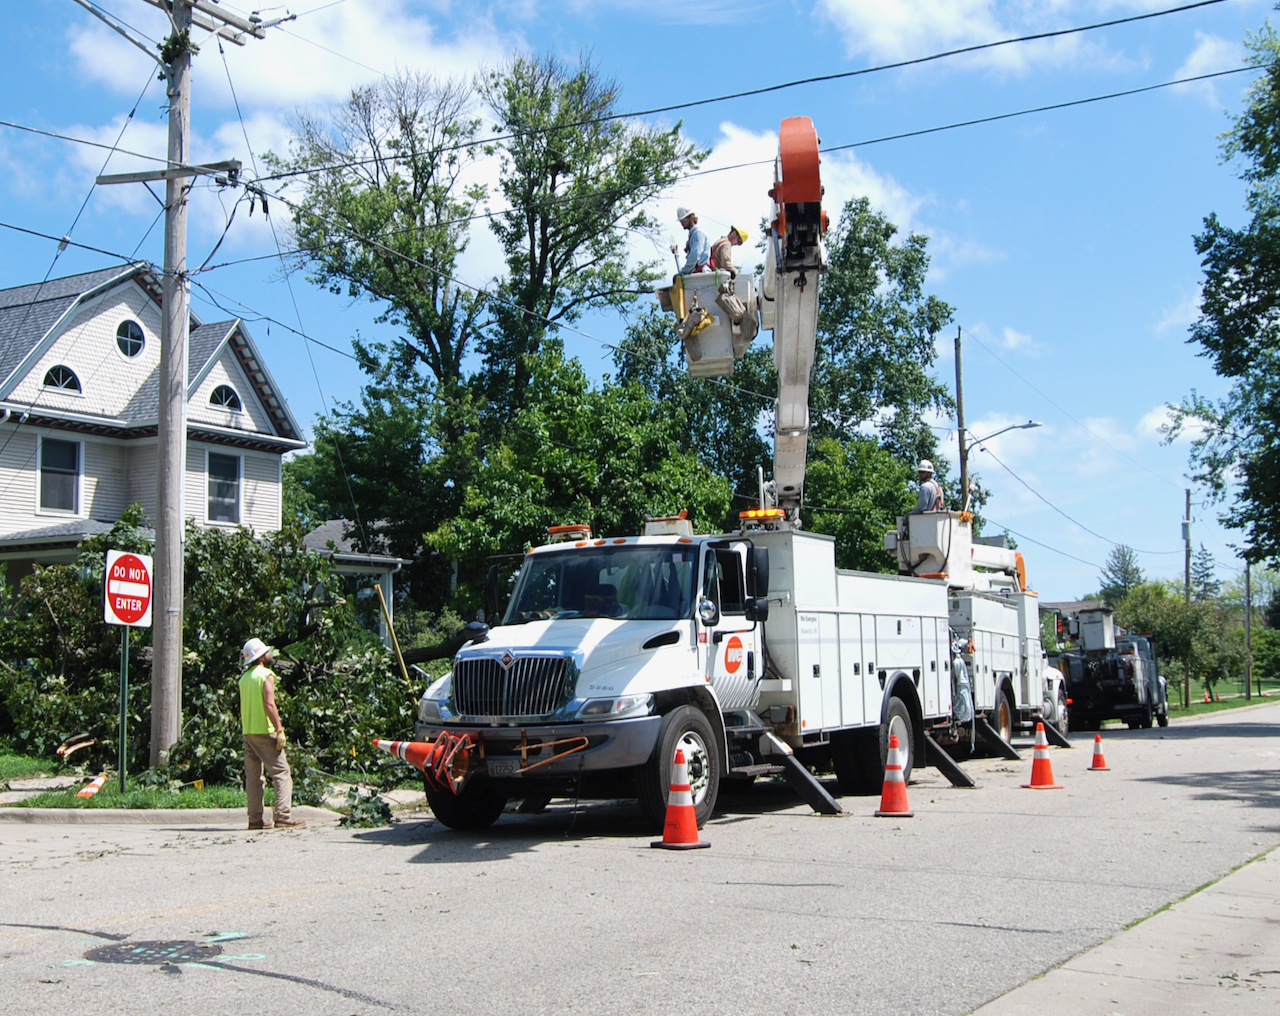 Jefferson, Walworth counties hit by storms; downed trees cause extensive power outages